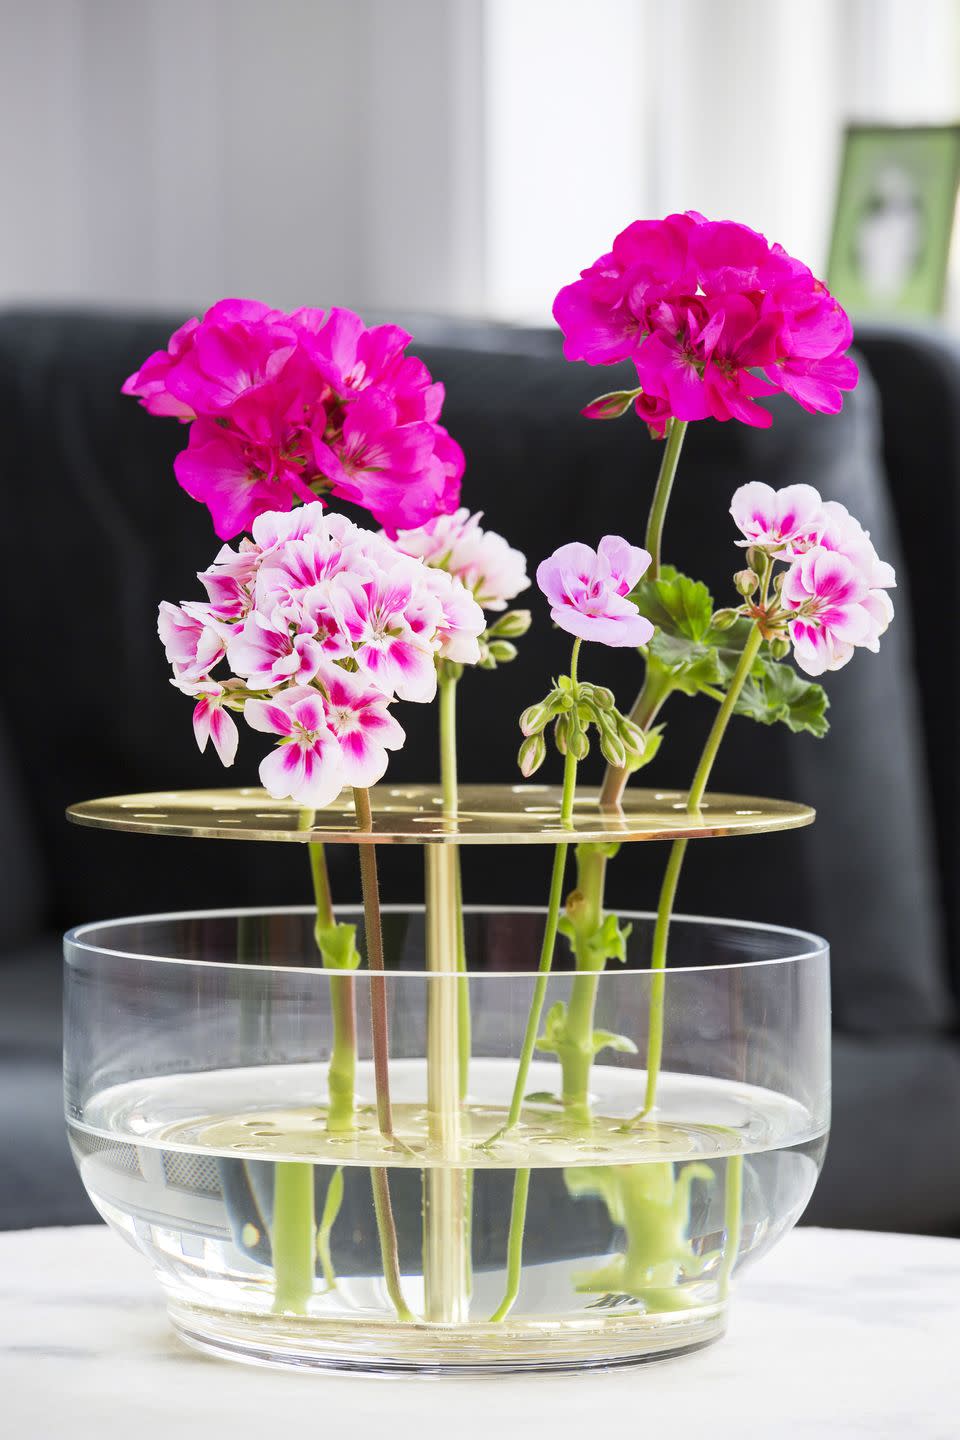 <p>In particular, the regal geranium was originally cultivated as a houseplant, and it also goes well with modern interiors.</p><p> Other geraniums such as angel and scented-leaved geraniums, also feel at home in a sunny spot indoors, where they create an unmistakeable feeling of summer. Use them as cut flowers too – a few geranium stems in a simple vase, adds colour to any room. </p>